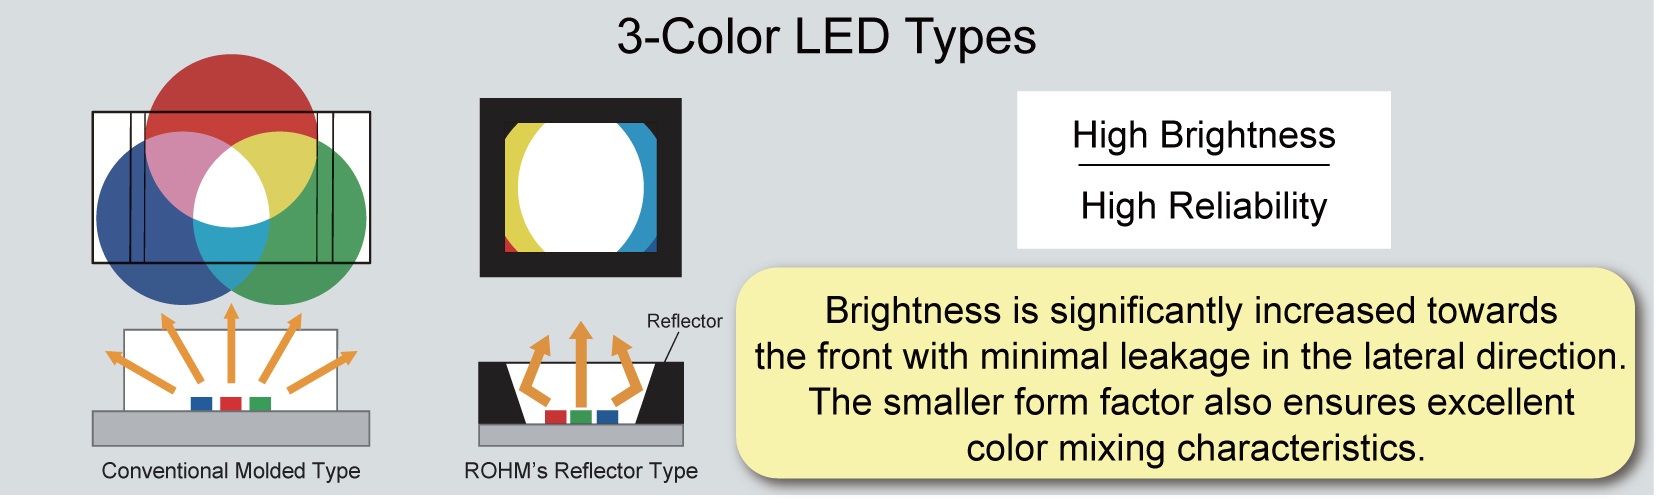 3-Color LED Types